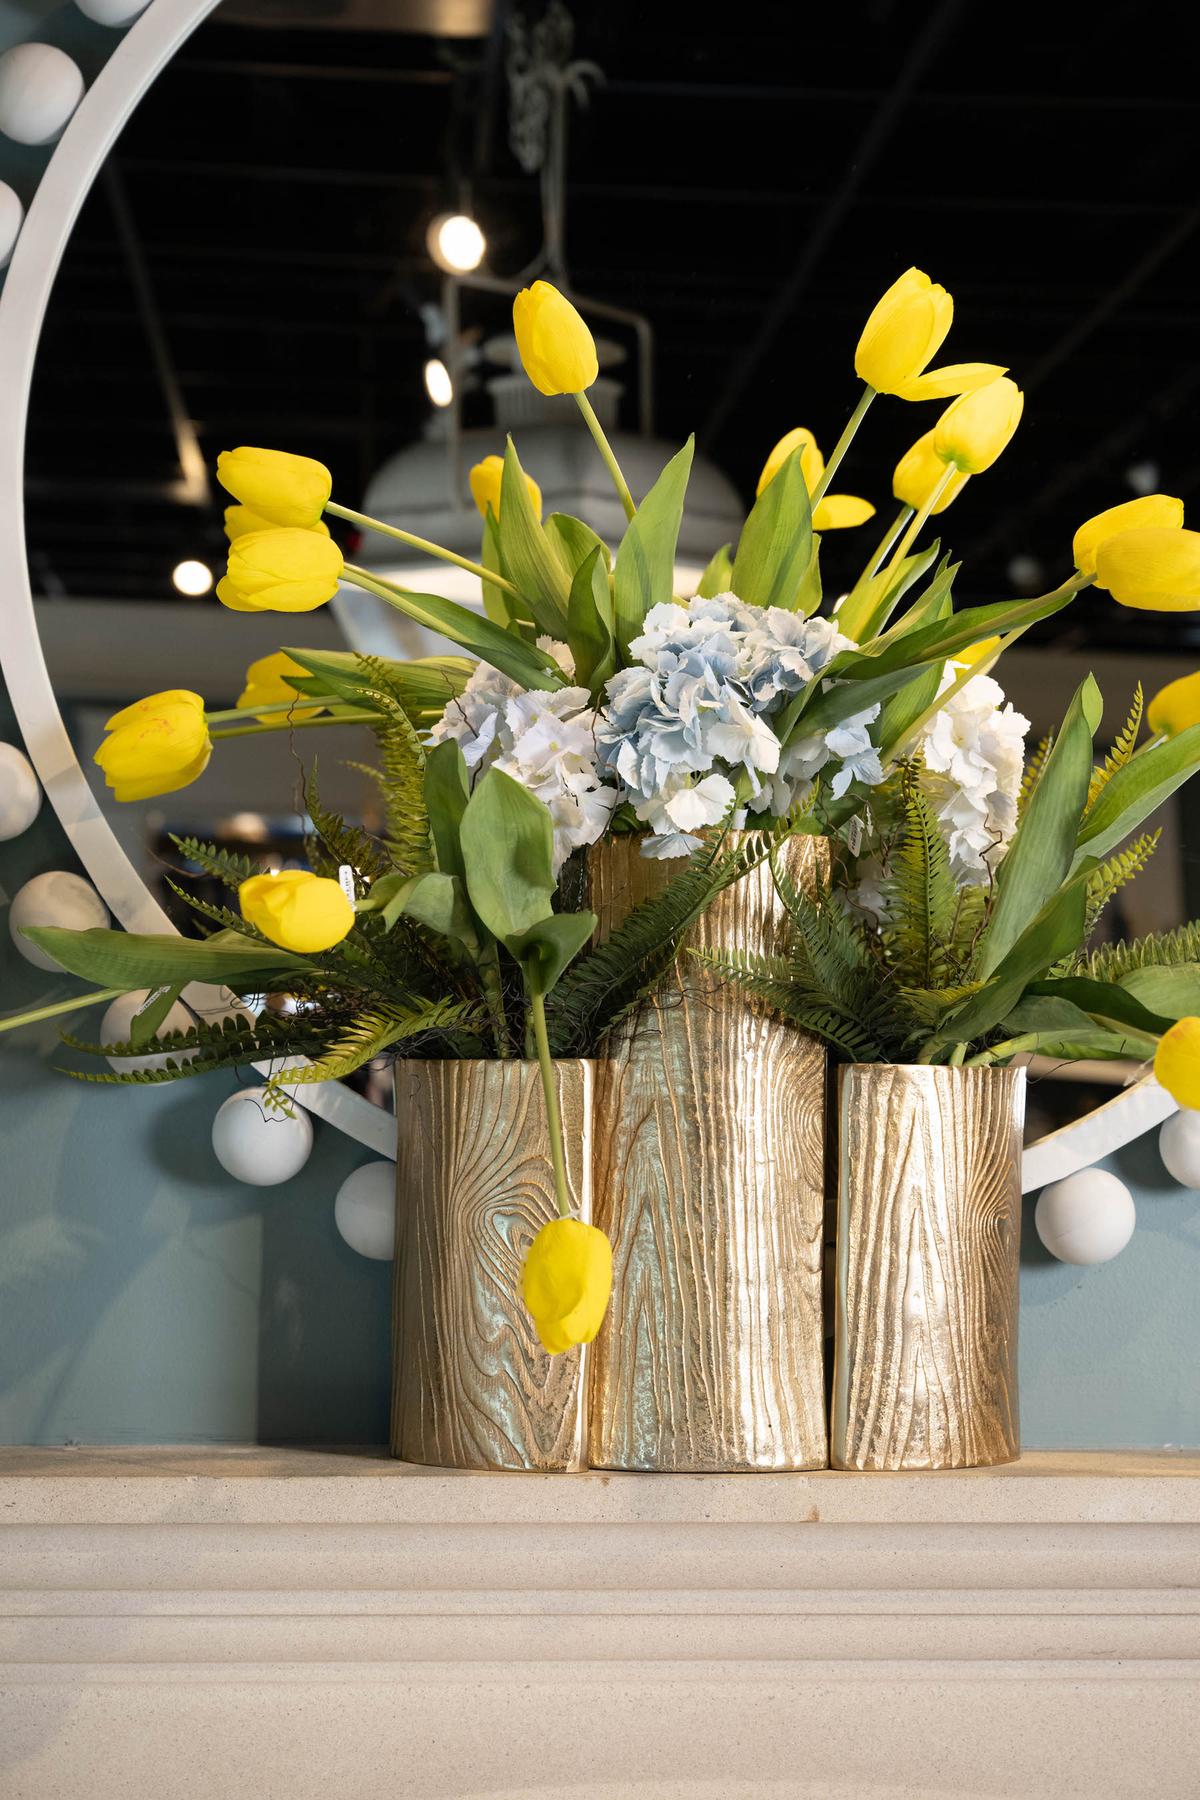 Selecting the right vessel for a floral arrangement is just as important as choosing the right stems. (Handout/TNS)